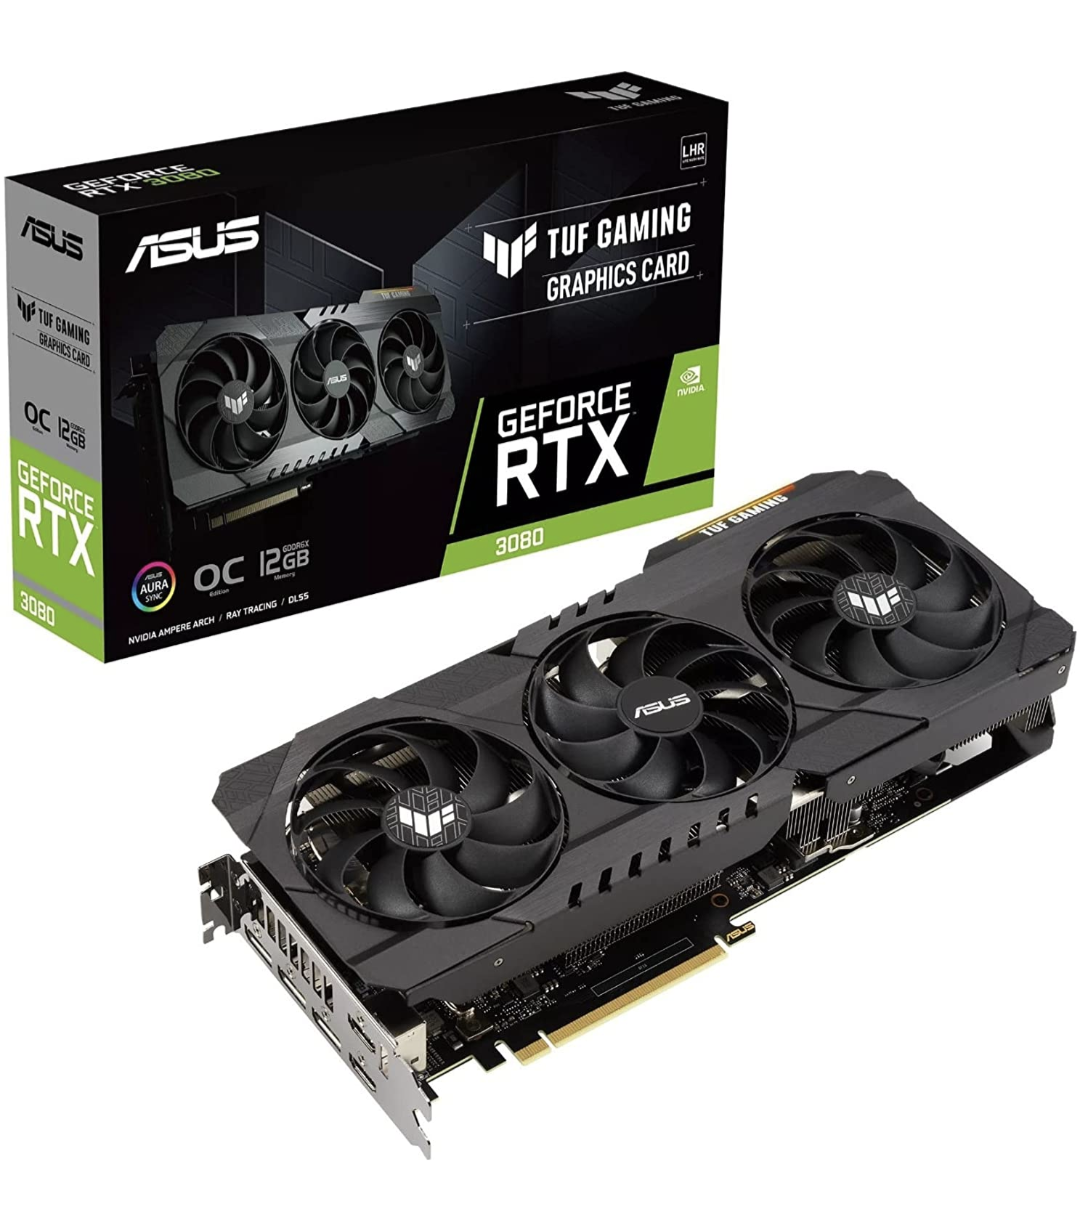 ASUS TUF Gaming NVIDIA GeForce RTX 3080 OC Edition Graphics Card $1049.99